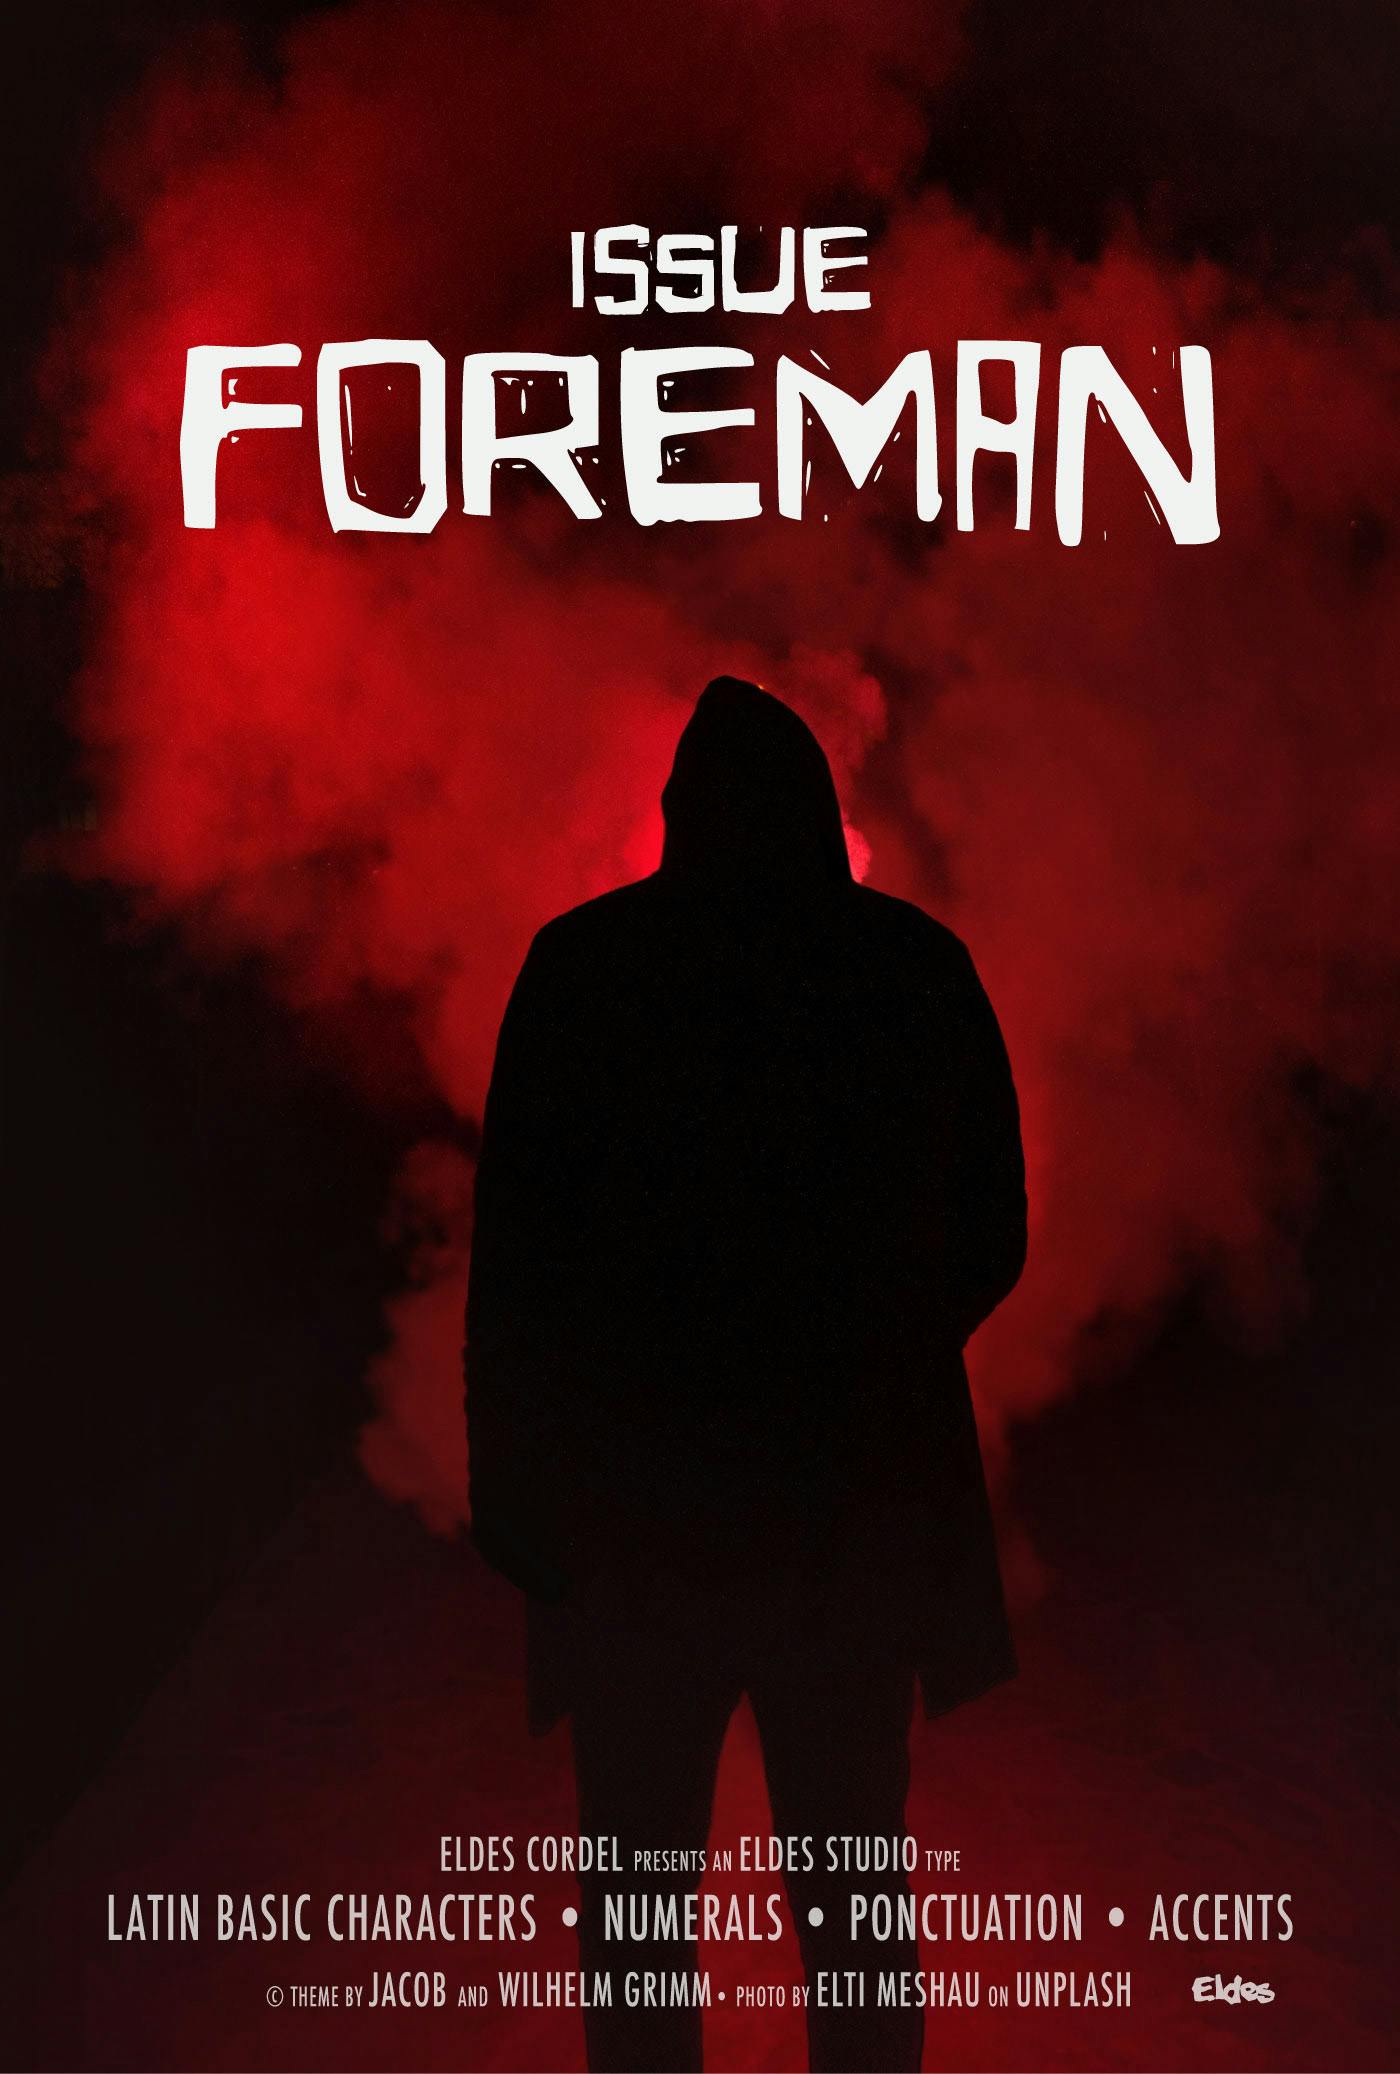 Use case: movie poster "Issue foreman"